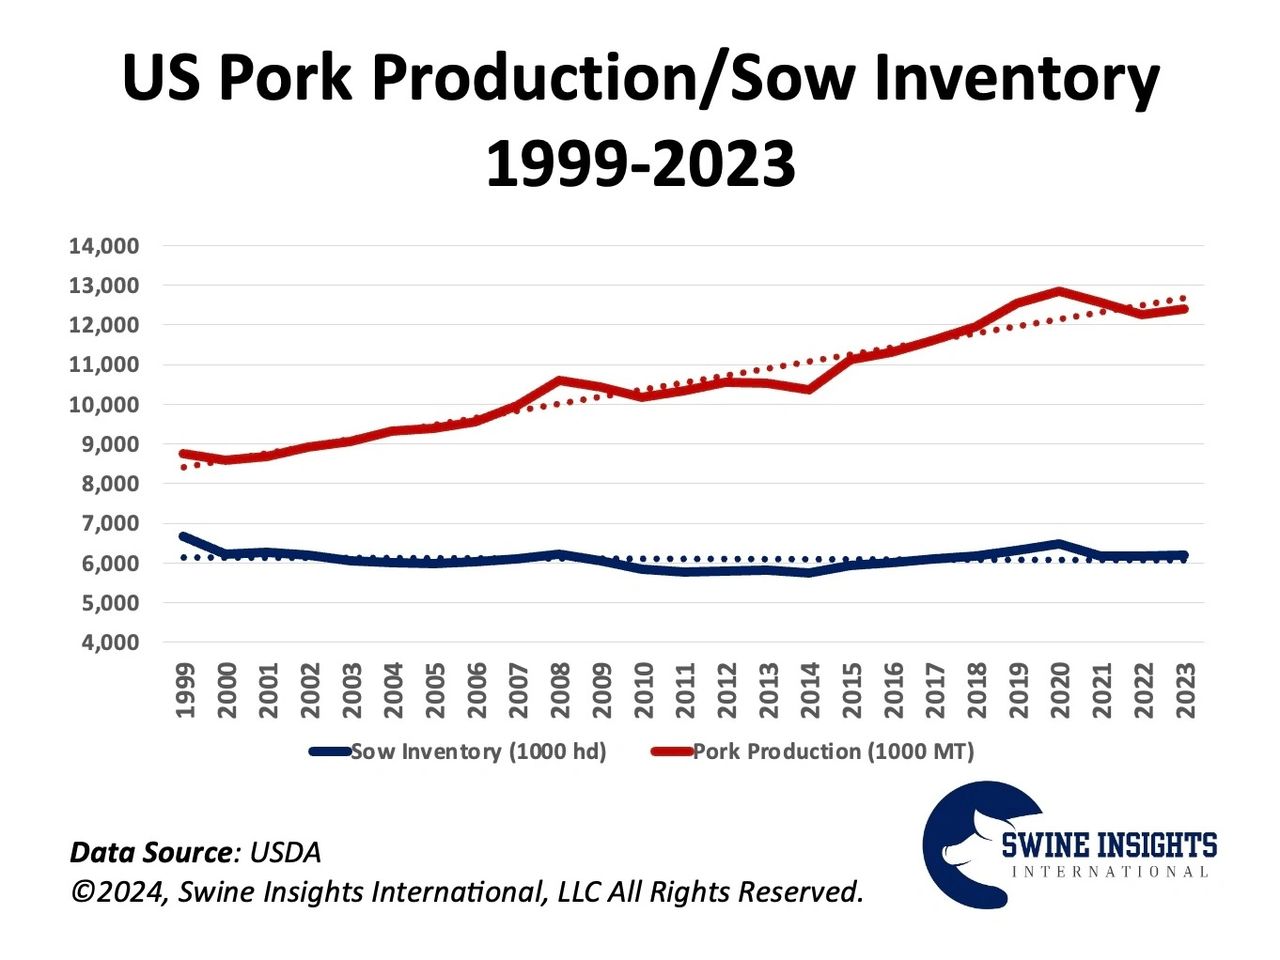 Between 1999 and 2023, the sow inventory has been mostly stable, but pork production has increased by over 40%.